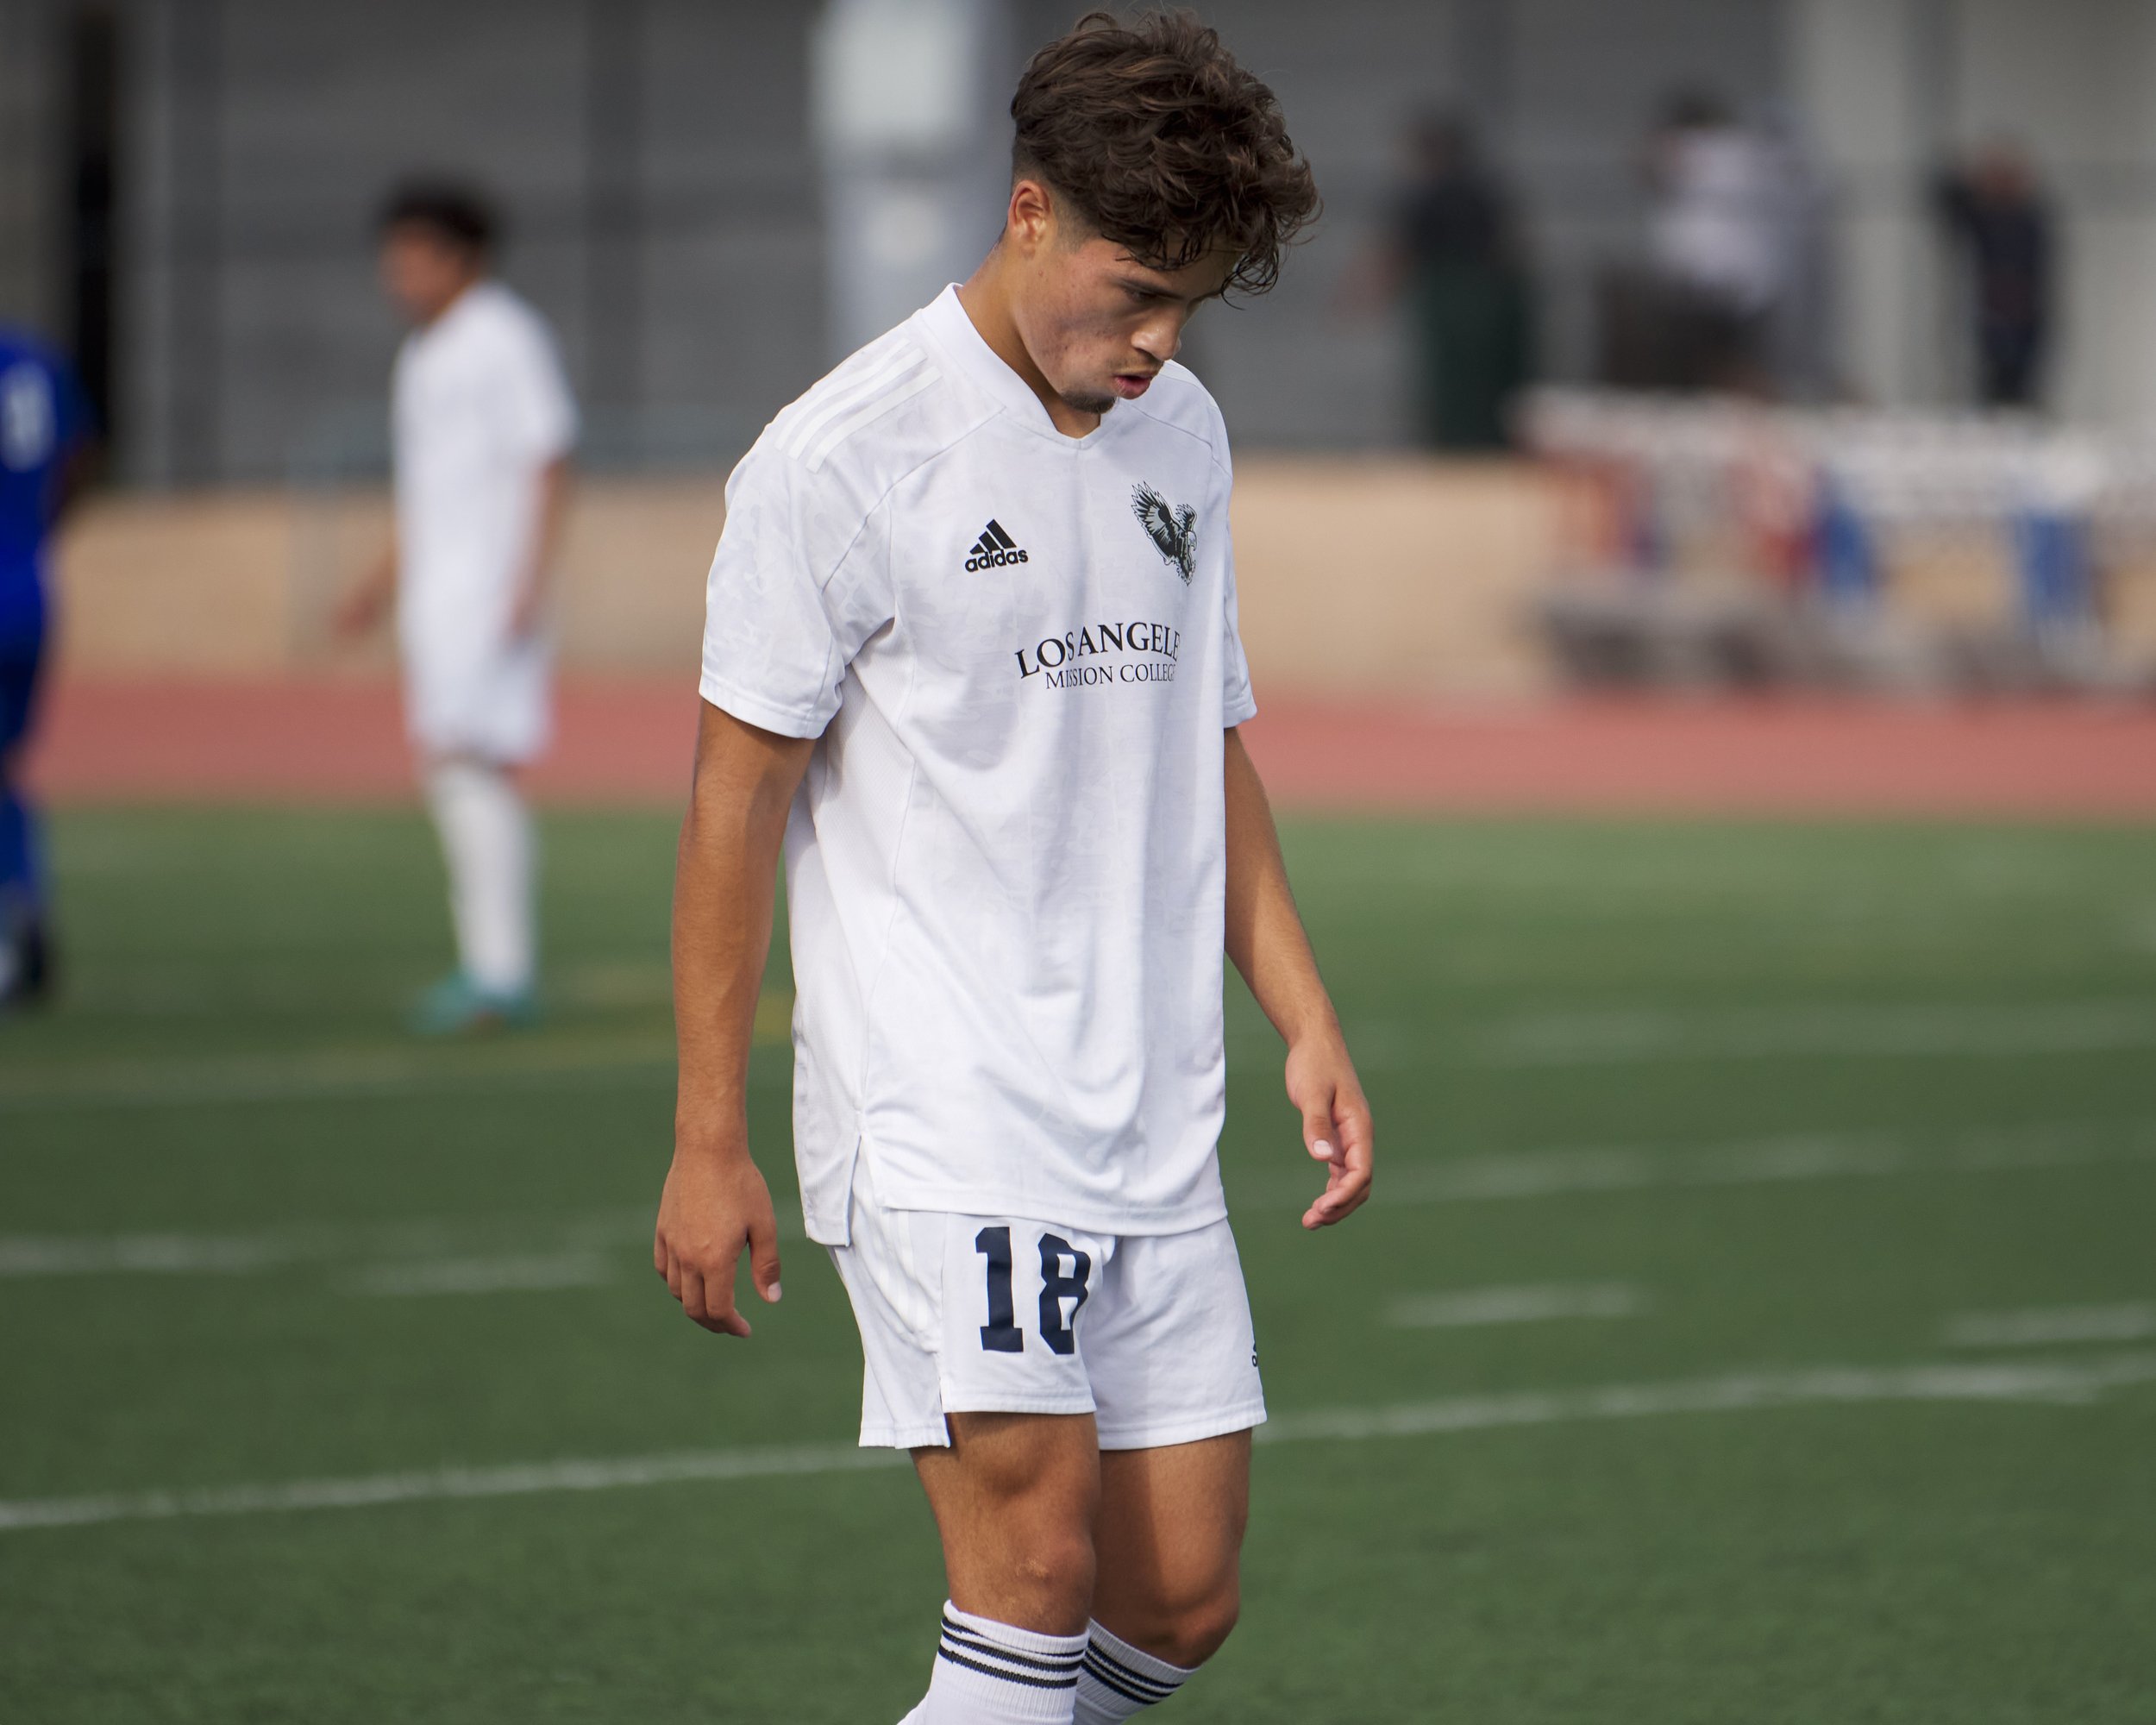  Los Angeles Mission College Eagles' Dominic Salazar leaves the field after earning a red card during the men's soccer match against the Santa Monica College Corsairs on Tuesday, Nov. 1, 2022, at Corsair Field in Santa Monica, Calif. The Corsairs won